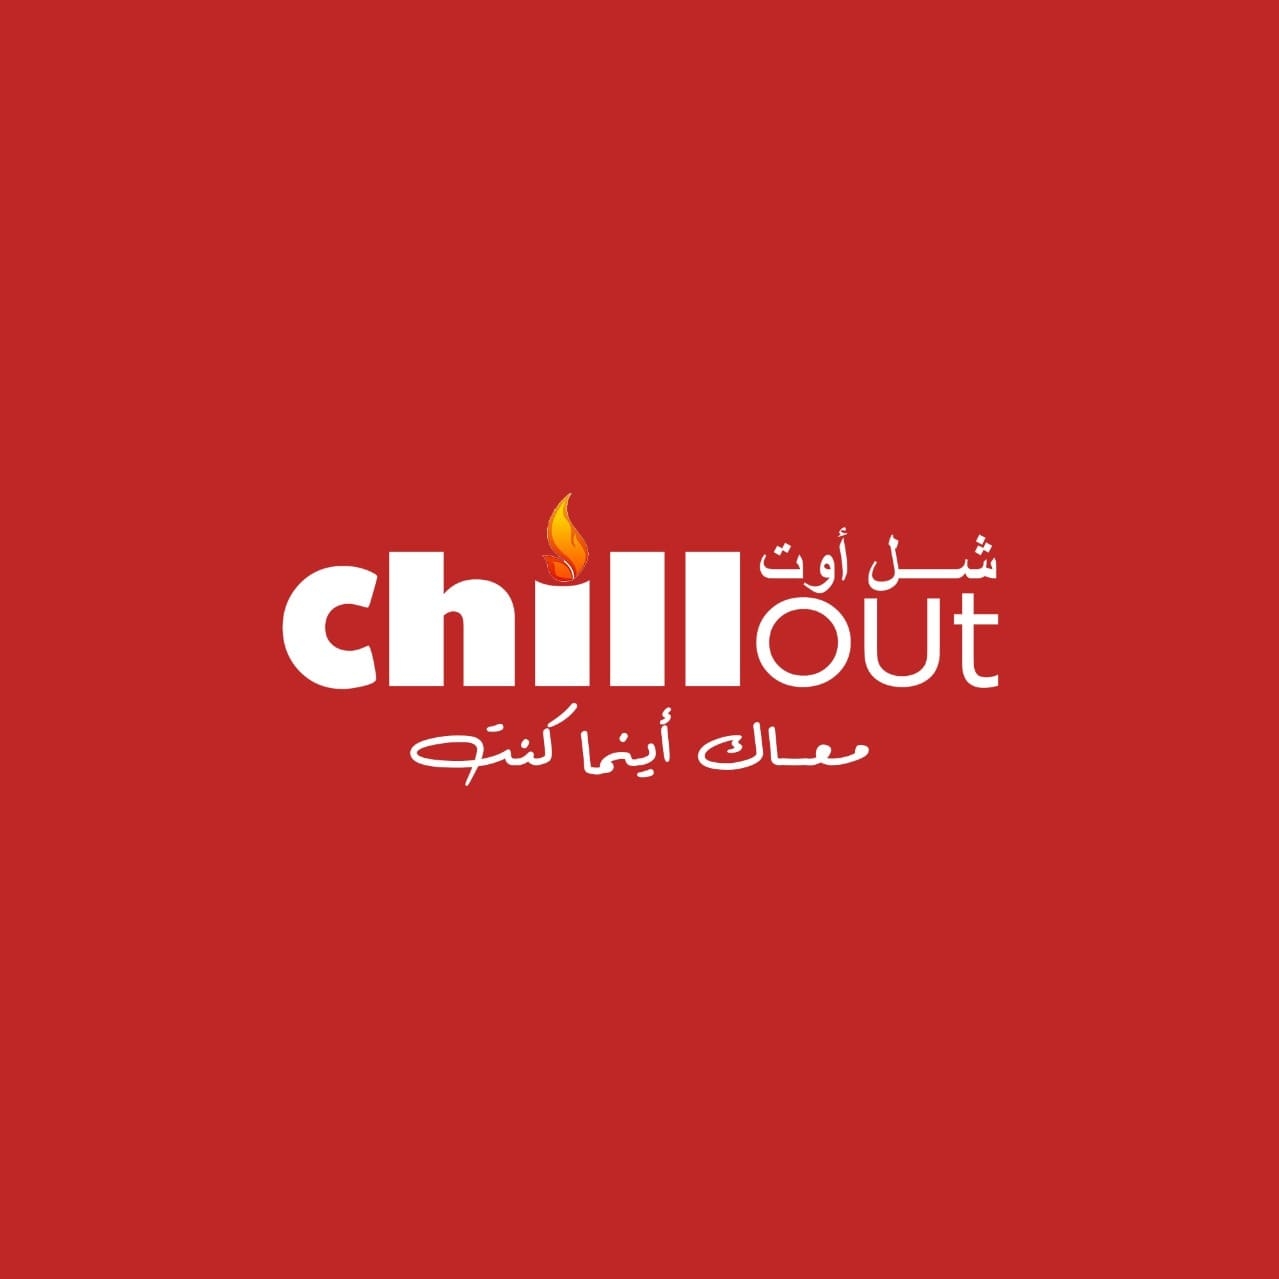 24 Chillout